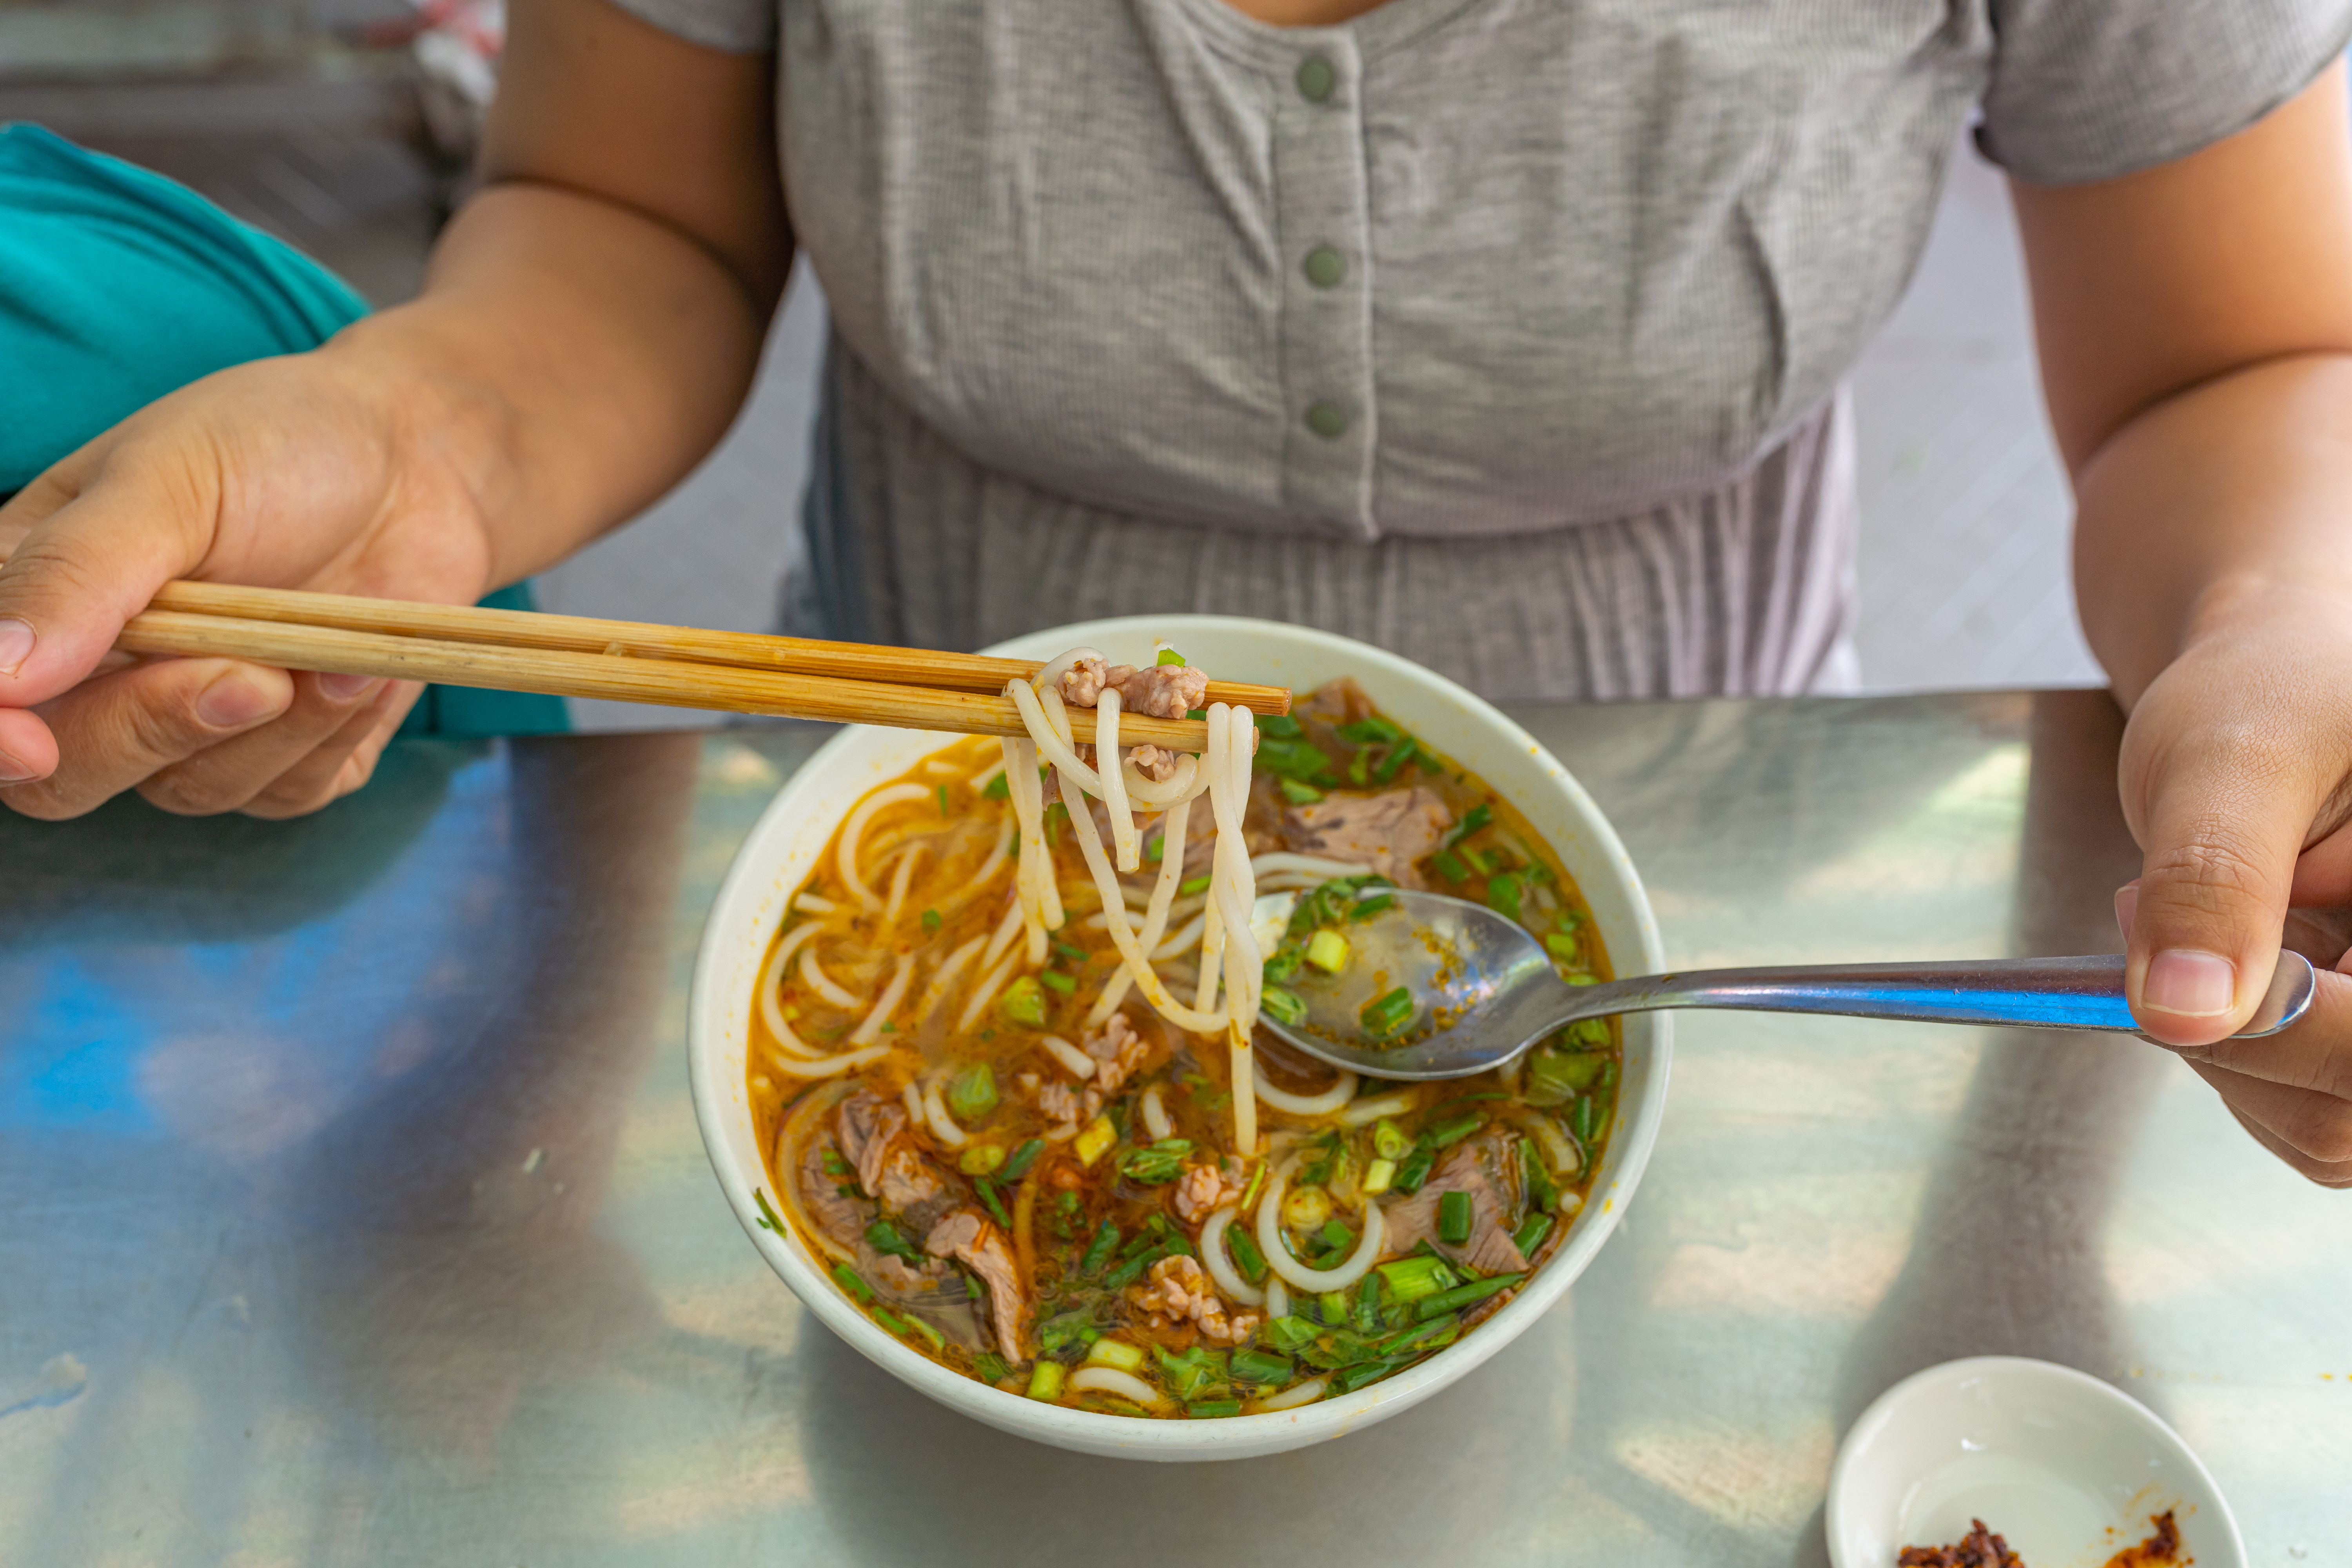 Tuck into traditional noodle dishes